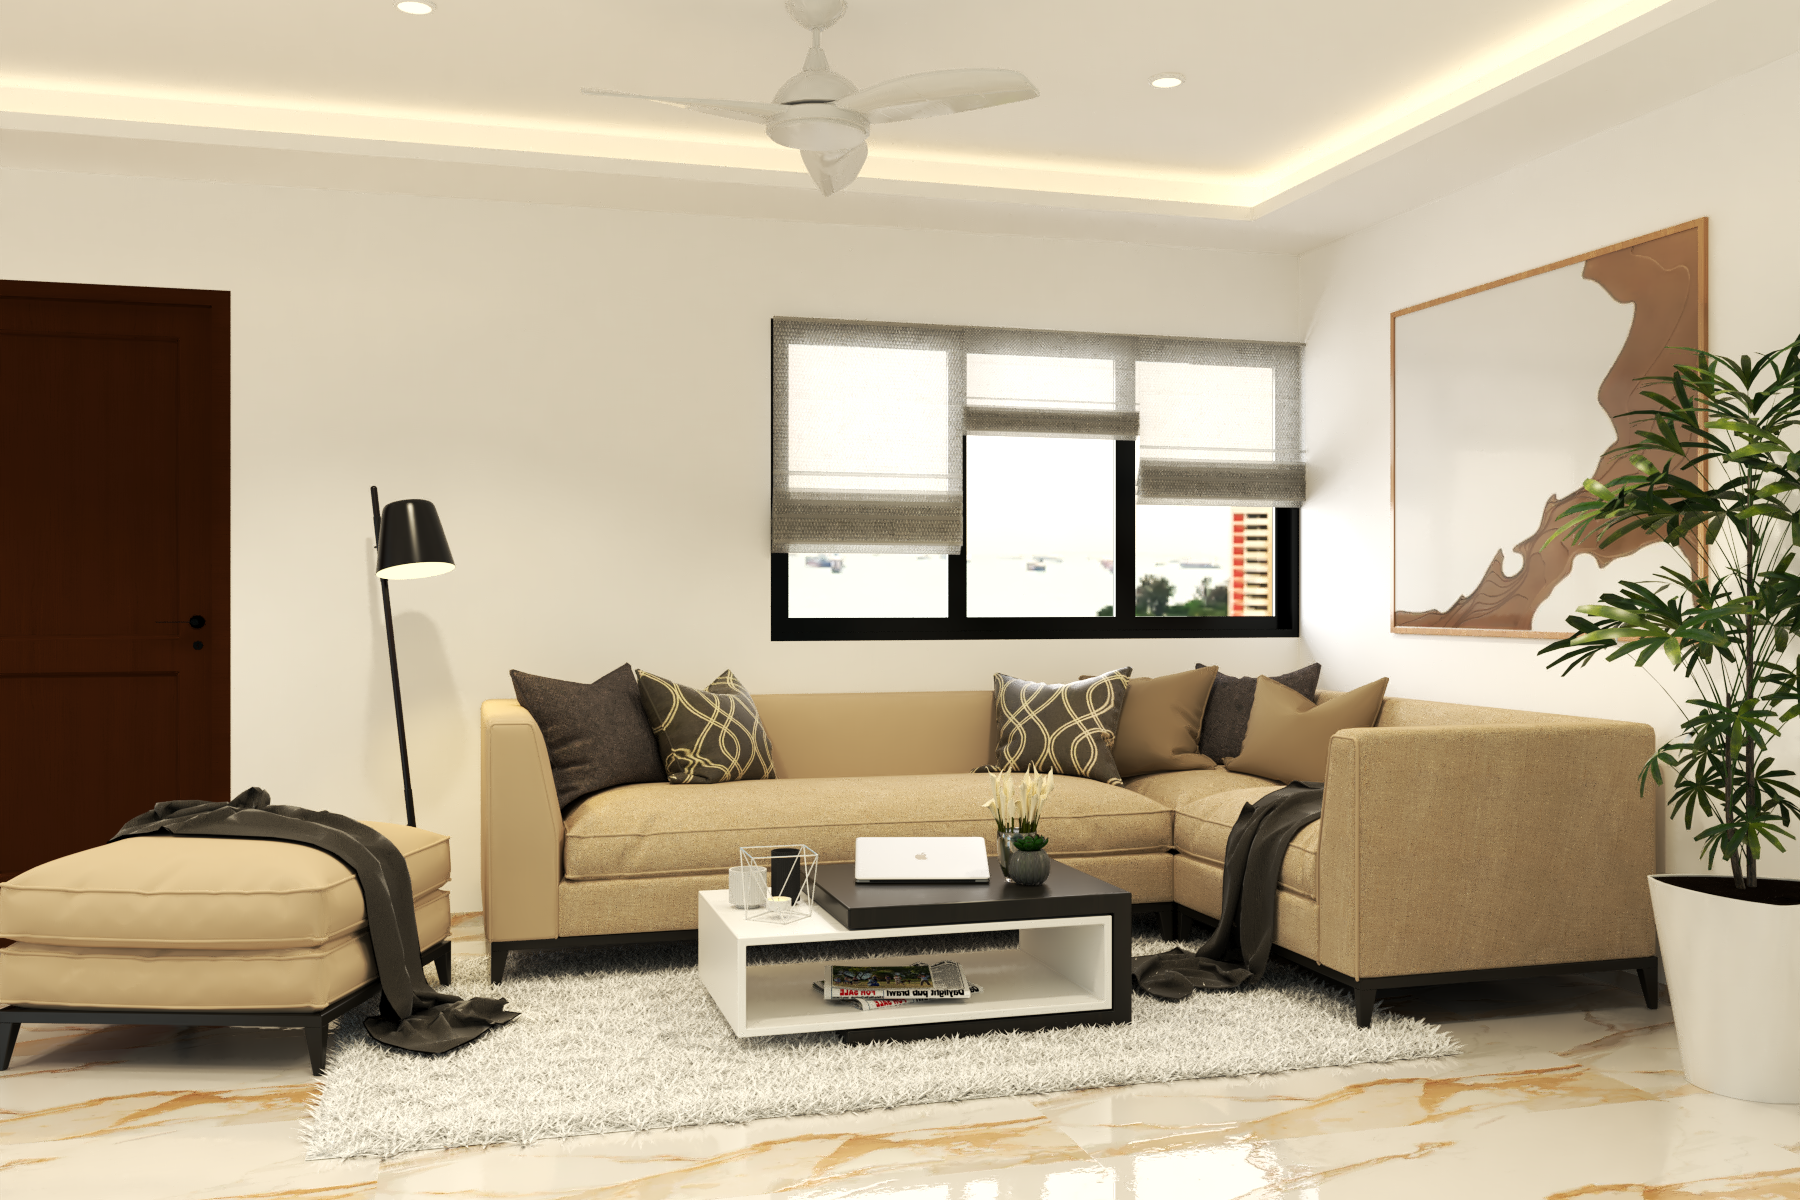 Spacious Living Room with Light and Dark Shades